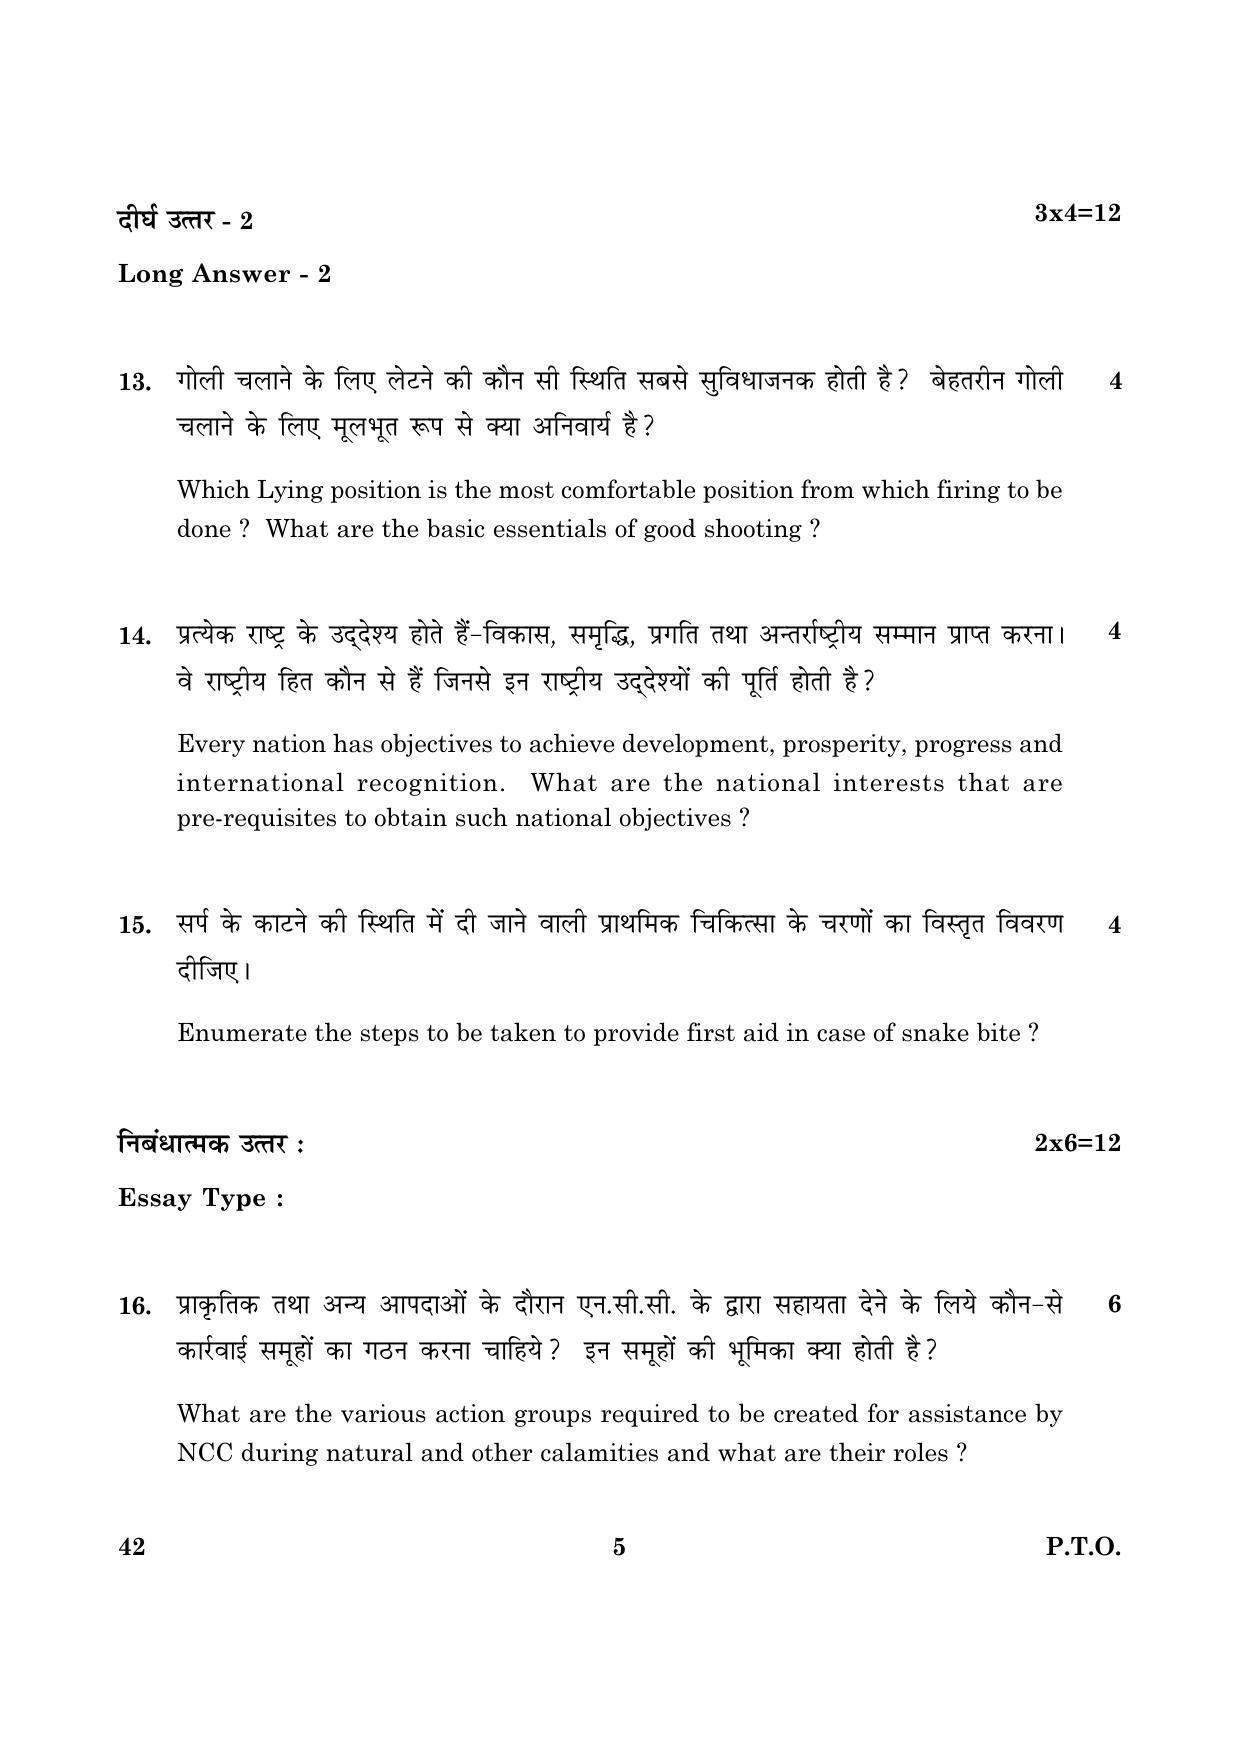 CBSE Class 12 042 National Cadet Corps (NCC) 2016 Question Paper - Page 5